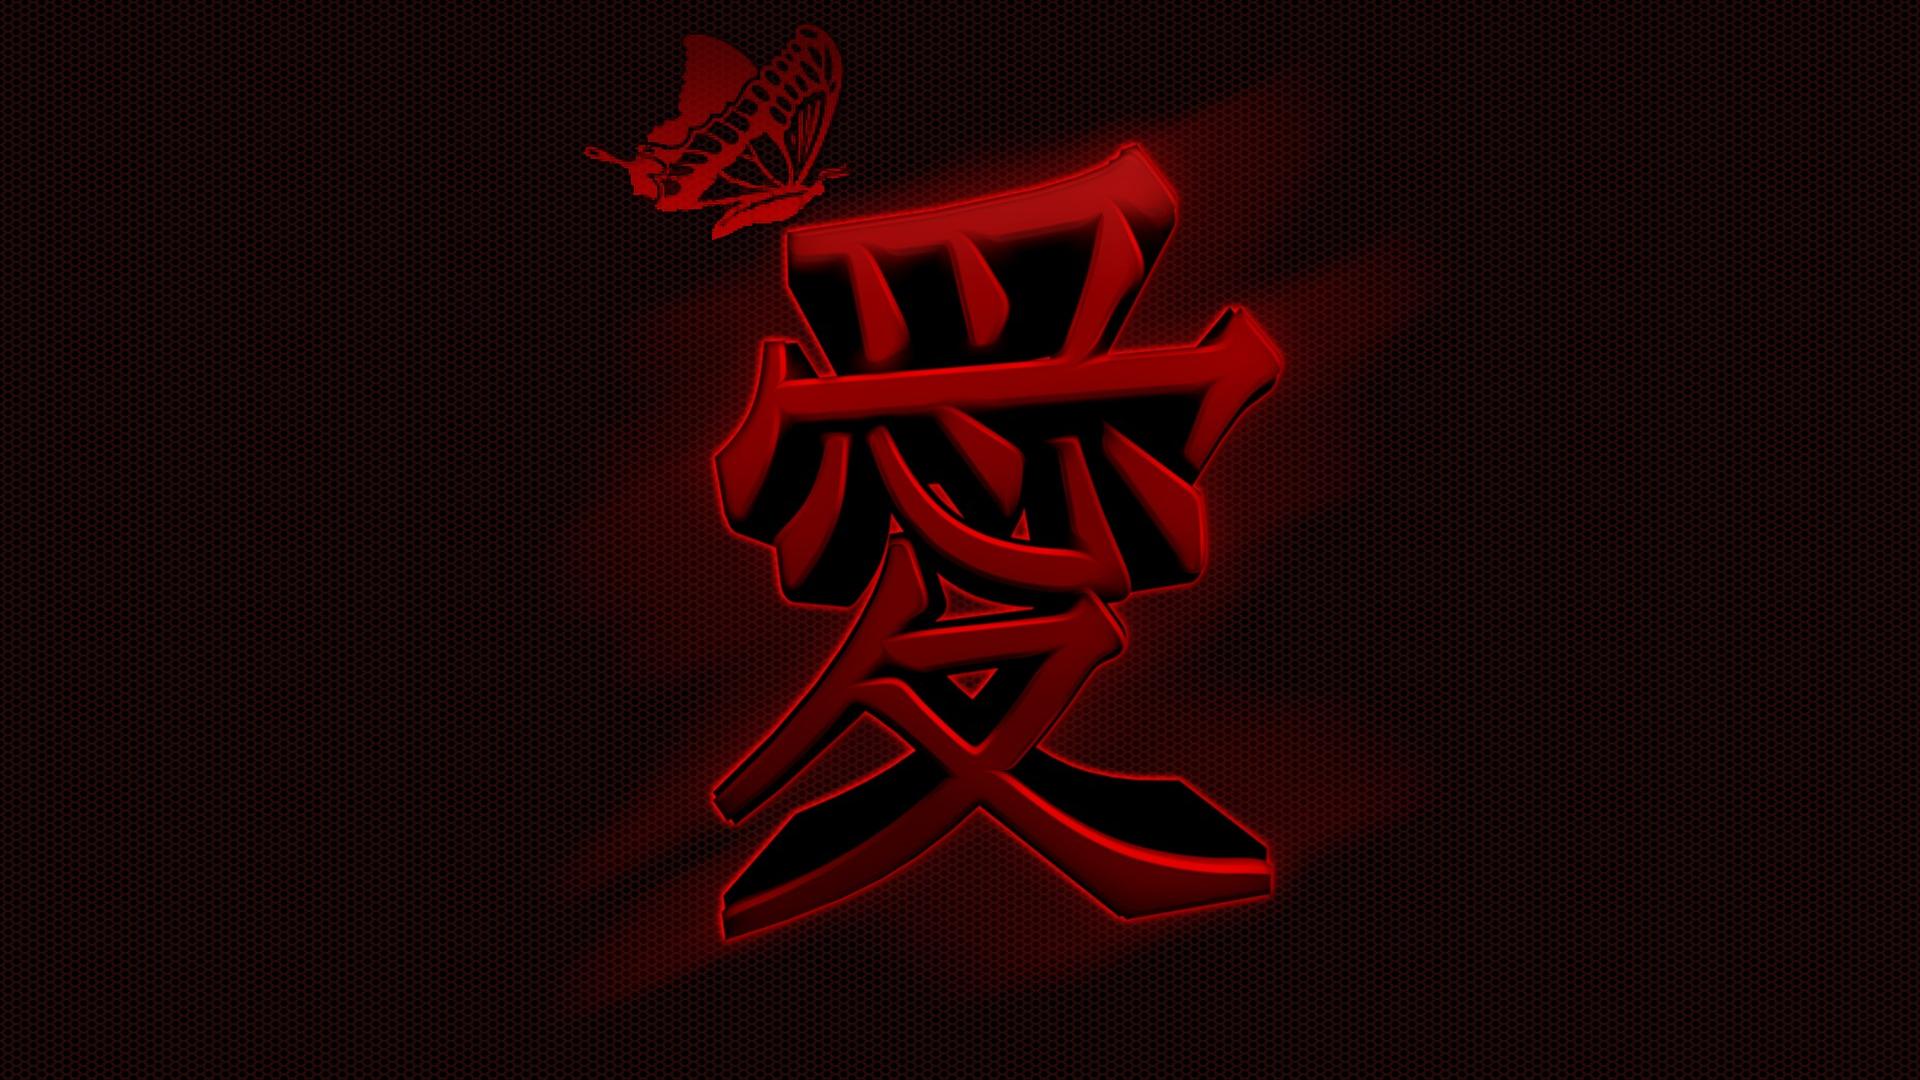 Chinese Symbol Wallpaper submited images